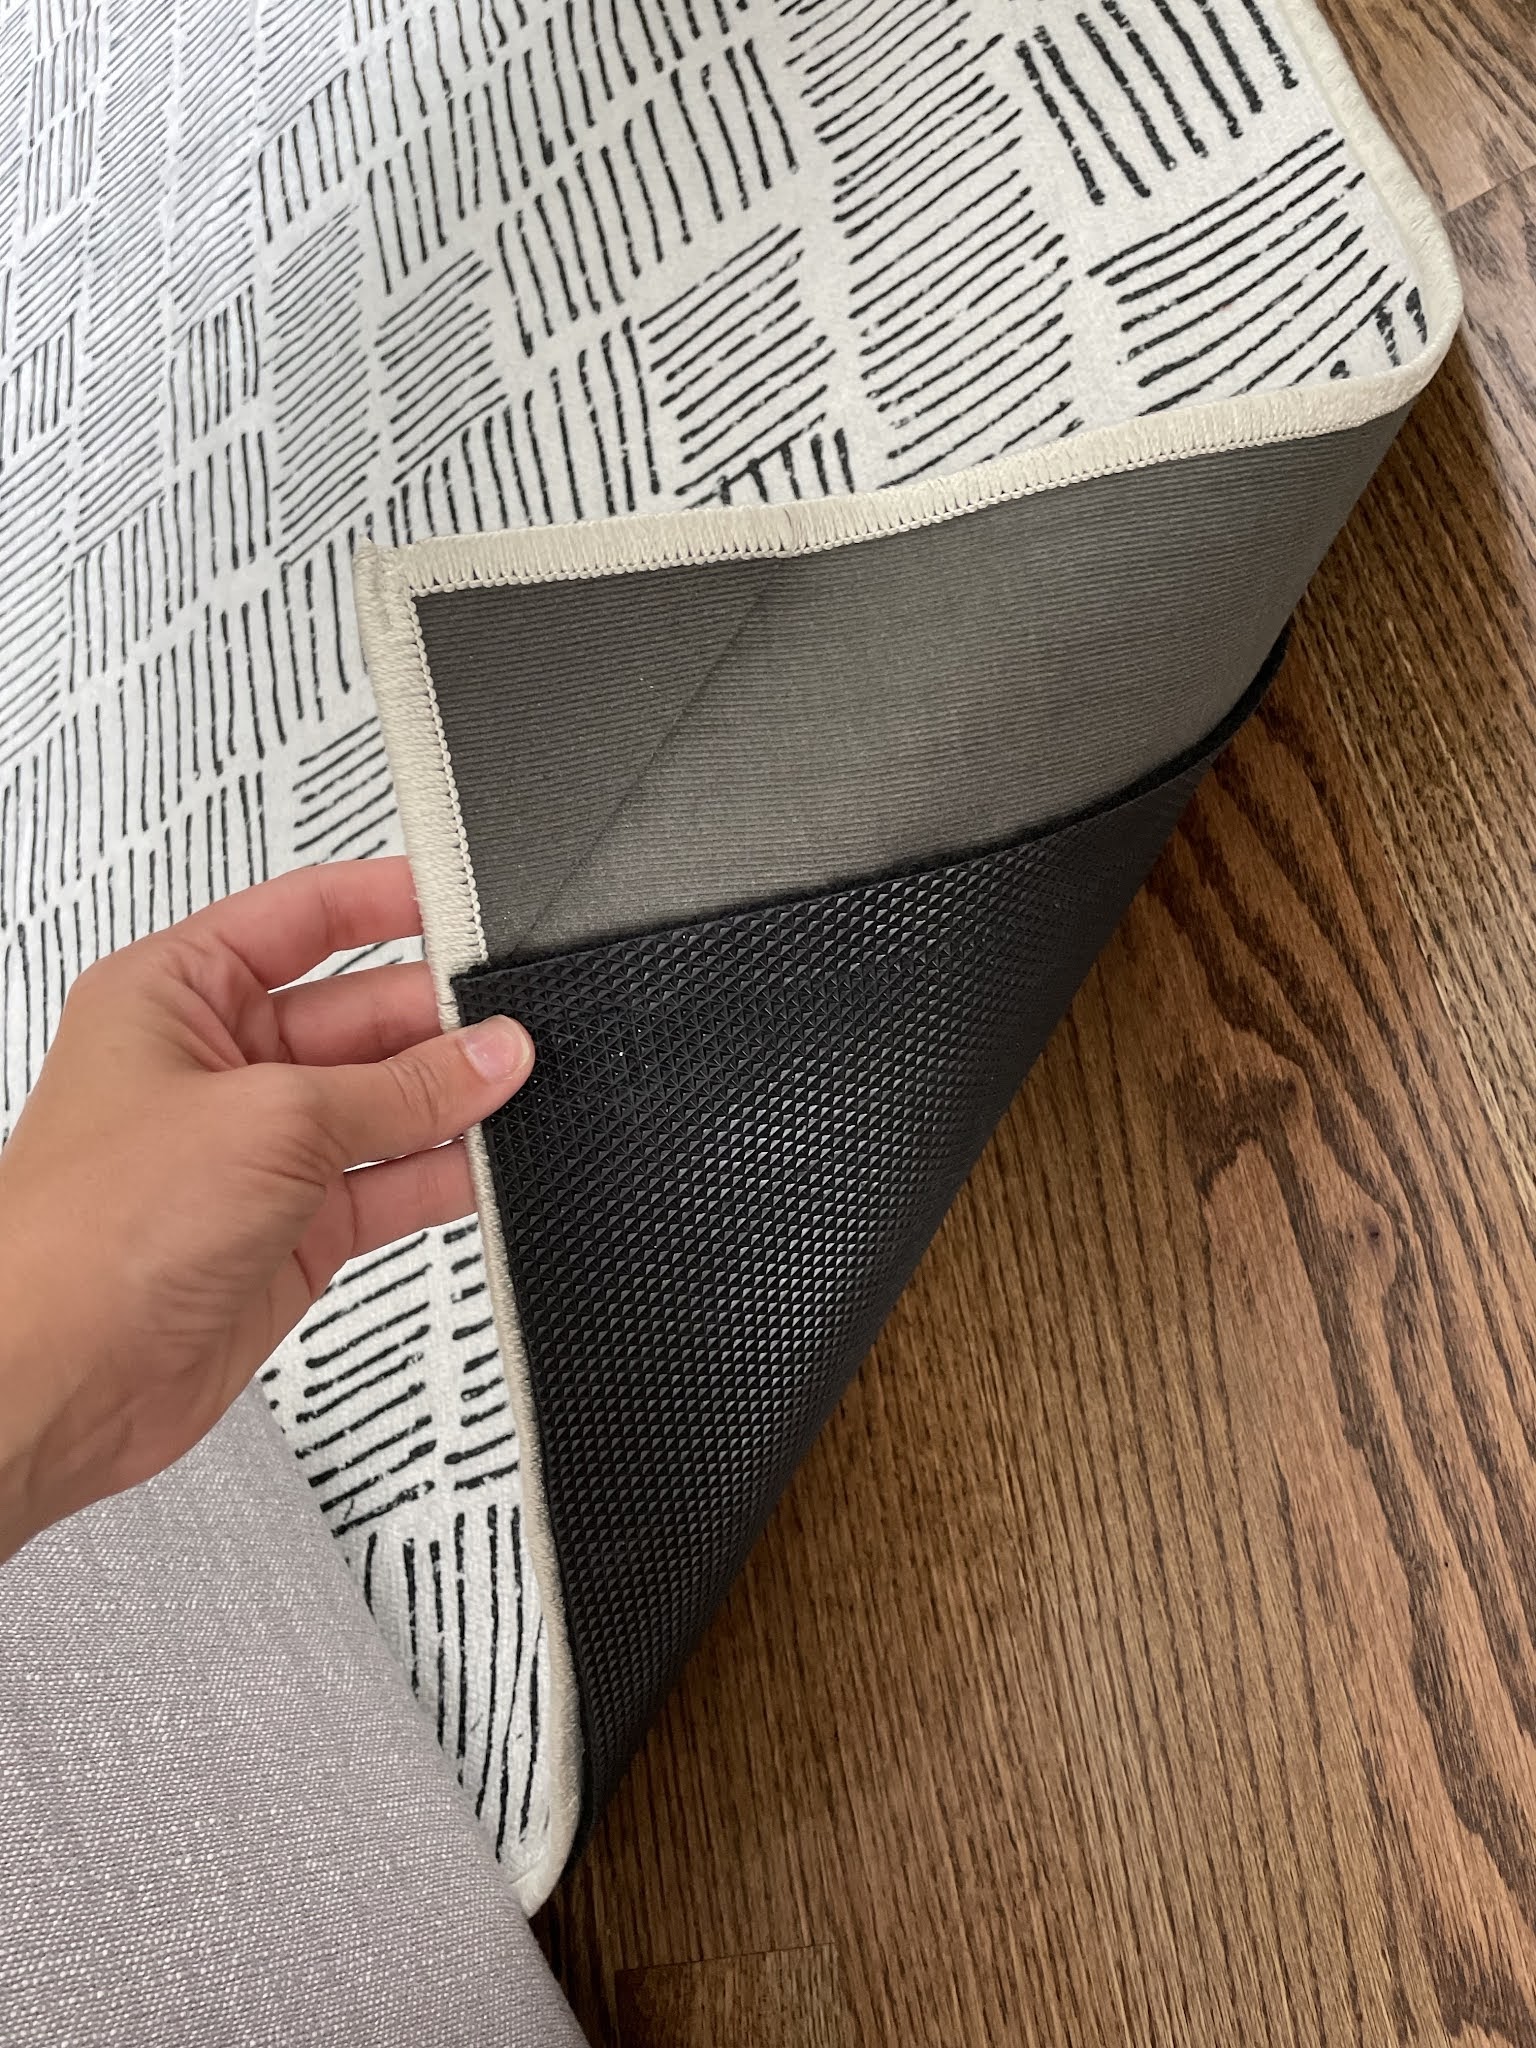 Do Ruggable rugs already come with a Rug Pad? – FAQs